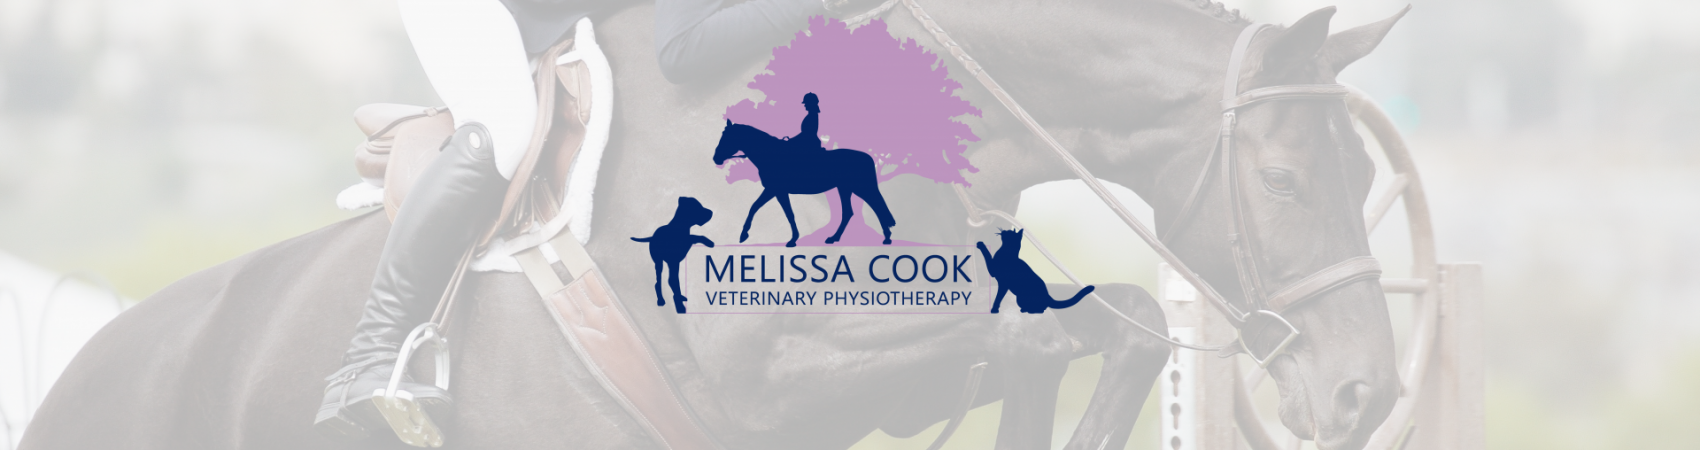 Melissa Cook Veterinary Physiotherapy